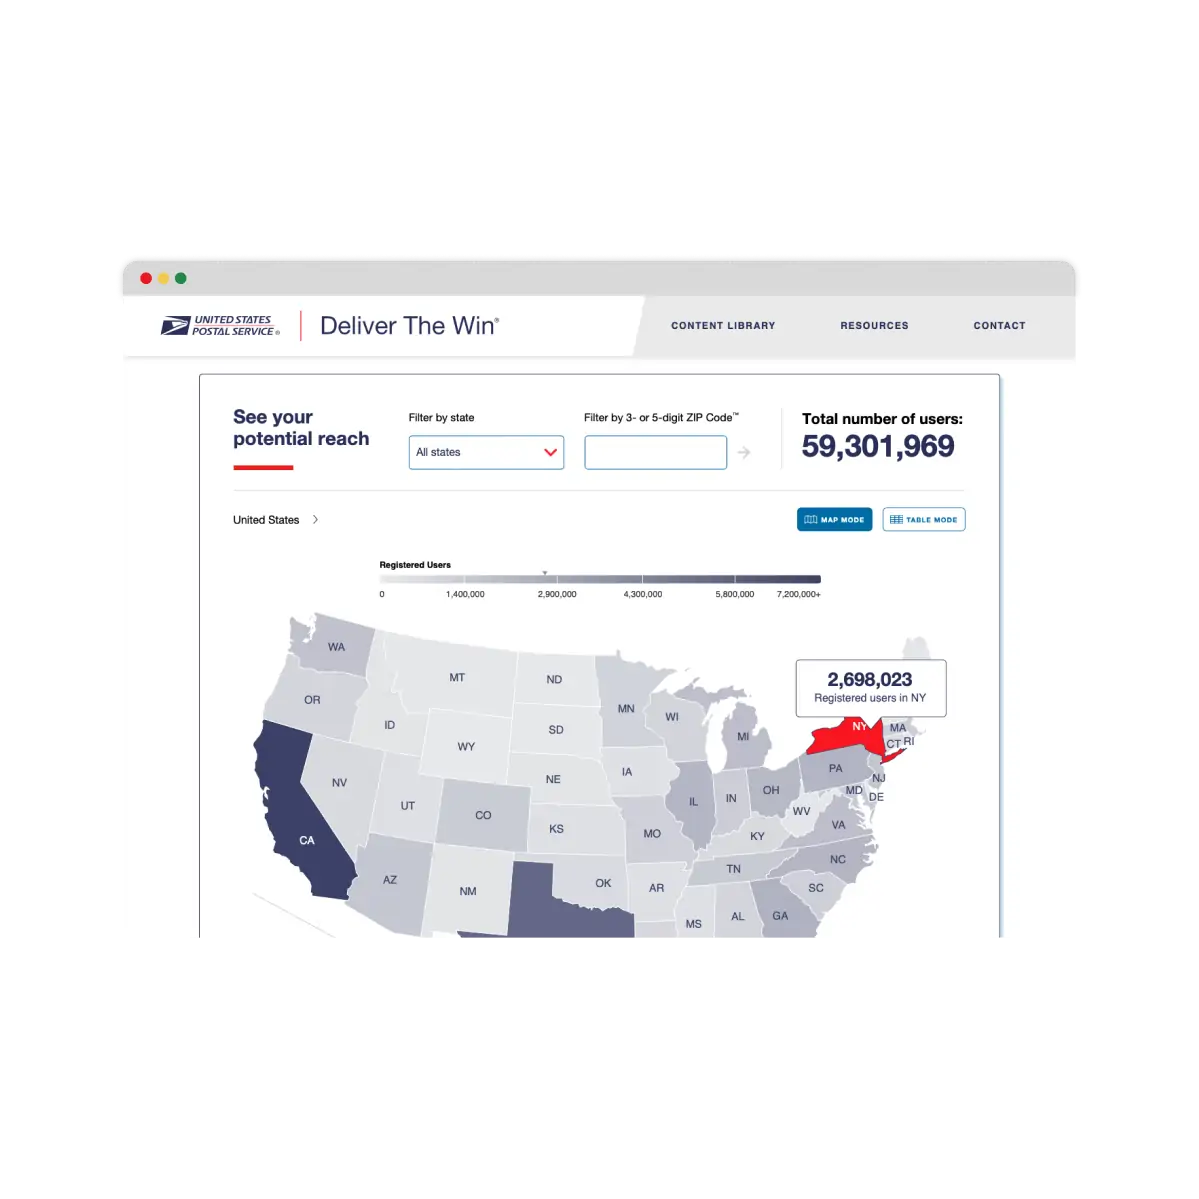 Screenshot image of the Informed Delivery User Interaction Map, built to showcase the number of Informed Delivery users by state and zip code.